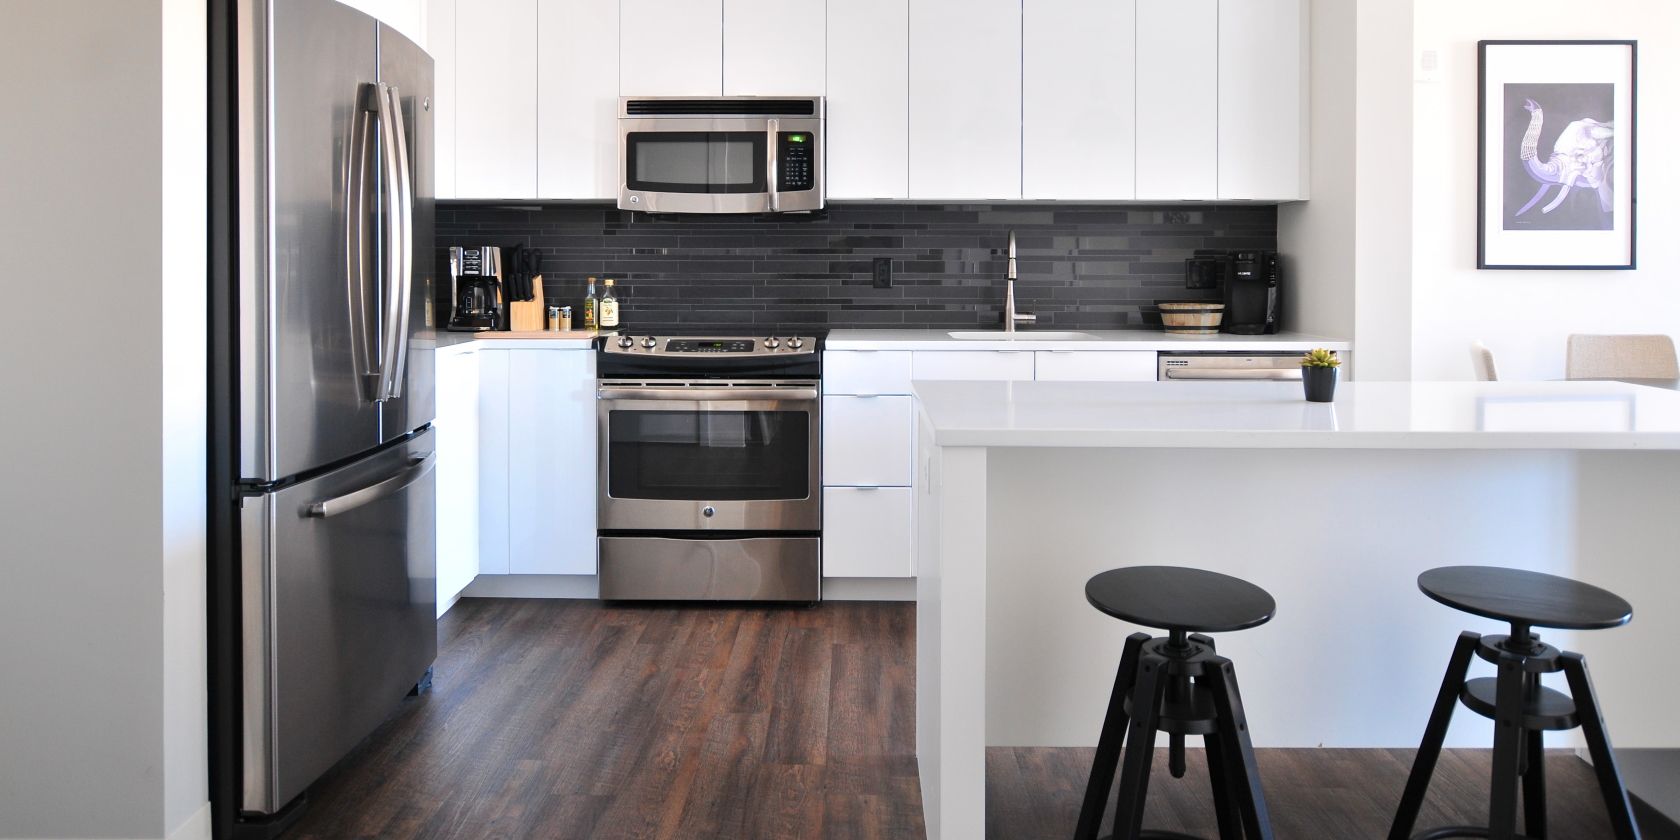 Planning to Renovate Your Kitchen? Try This Website